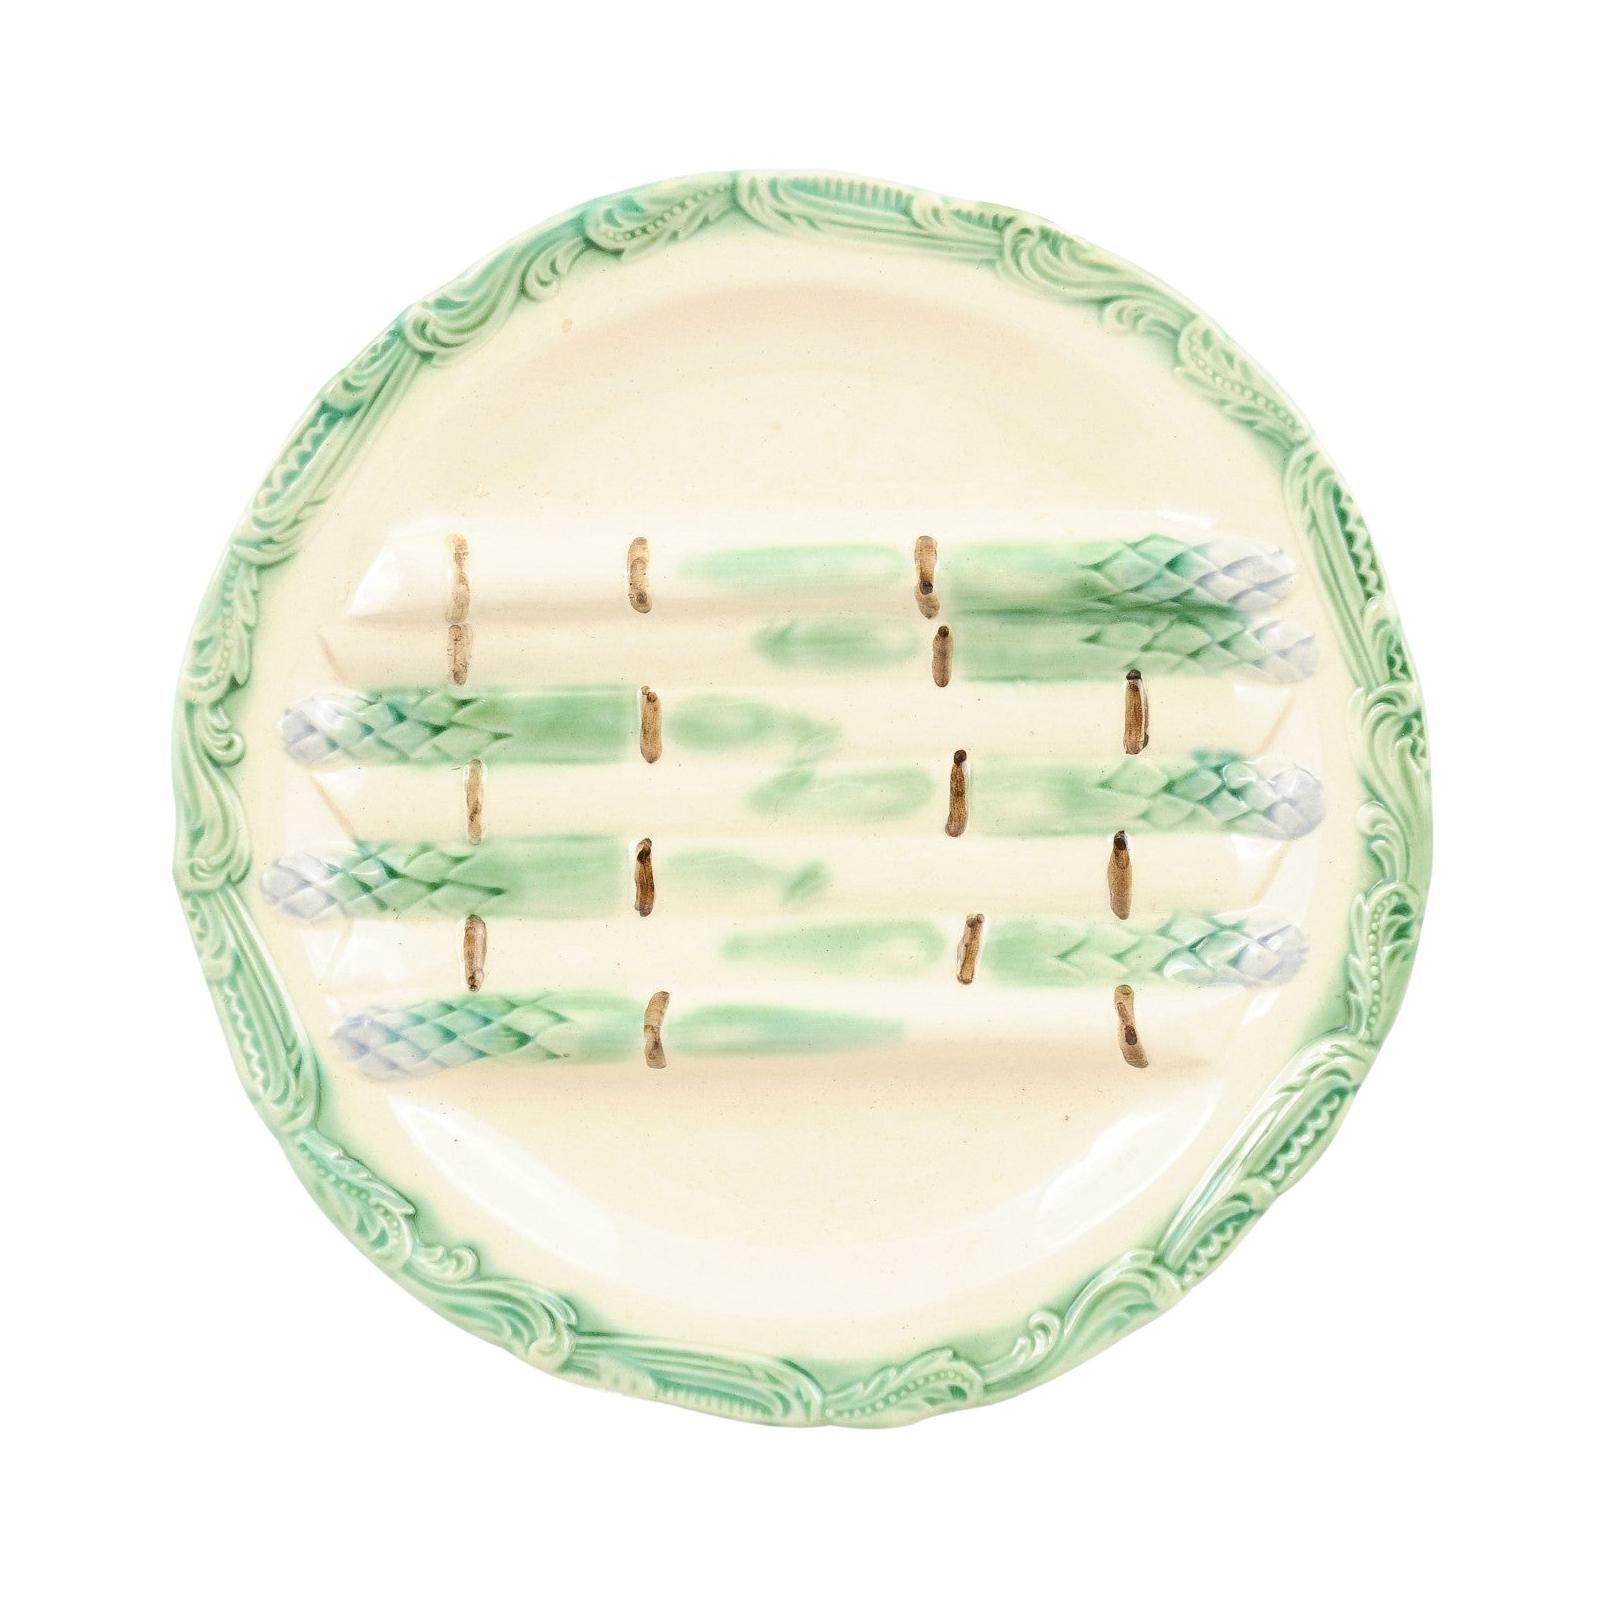 French 19th Century Majolica Asparagus Plate with Green and Cream Accents